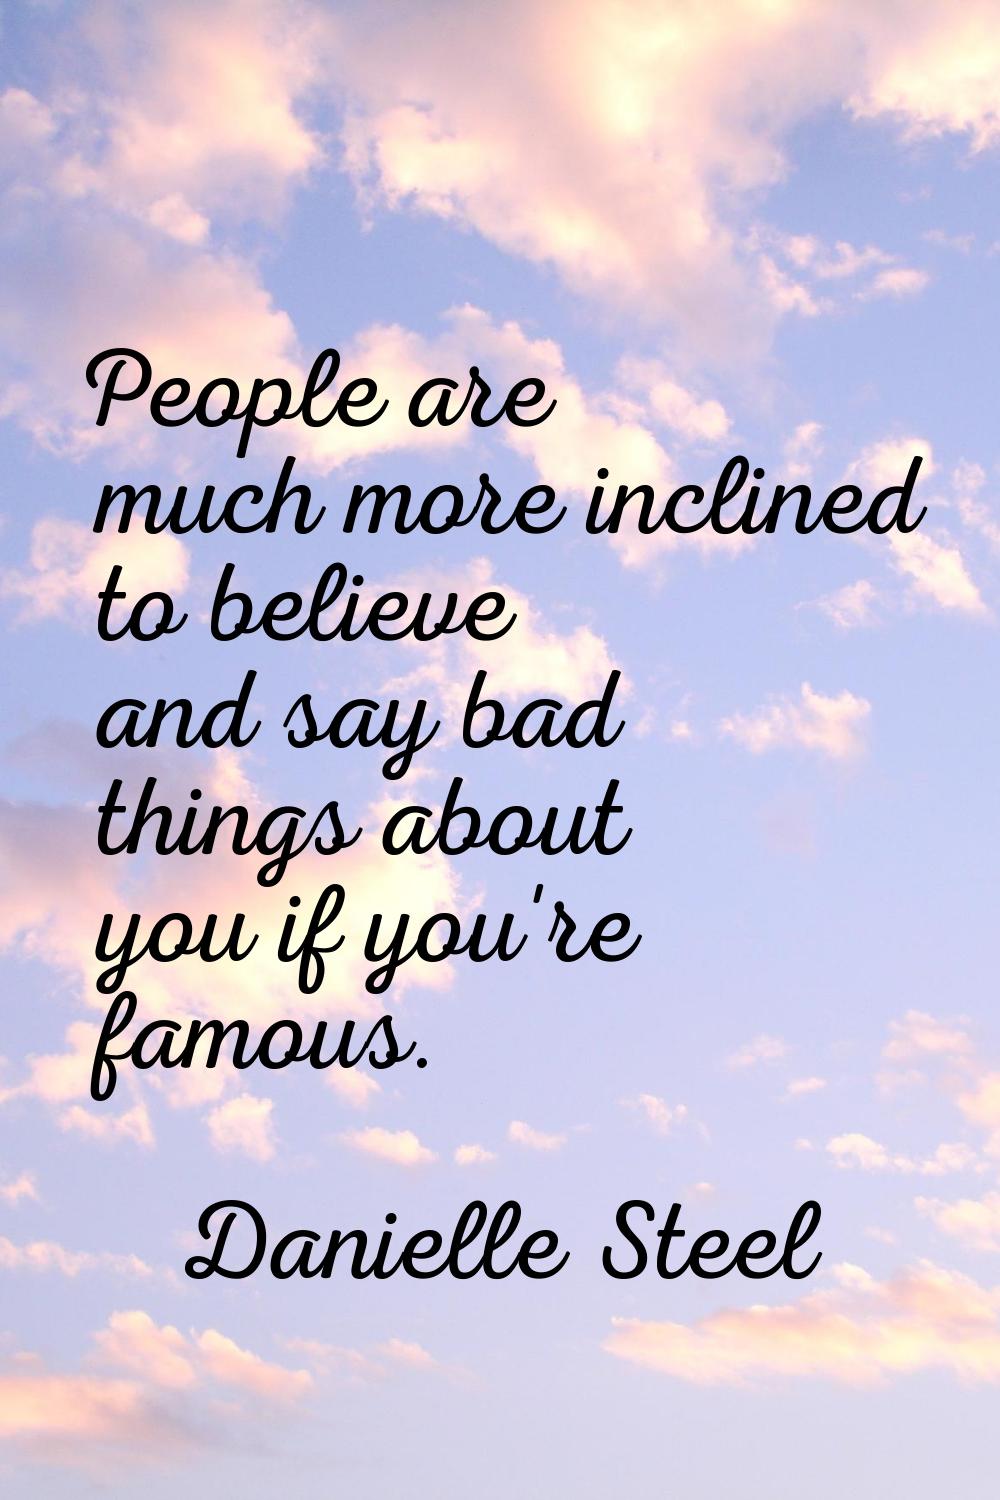 People are much more inclined to believe and say bad things about you if you're famous.